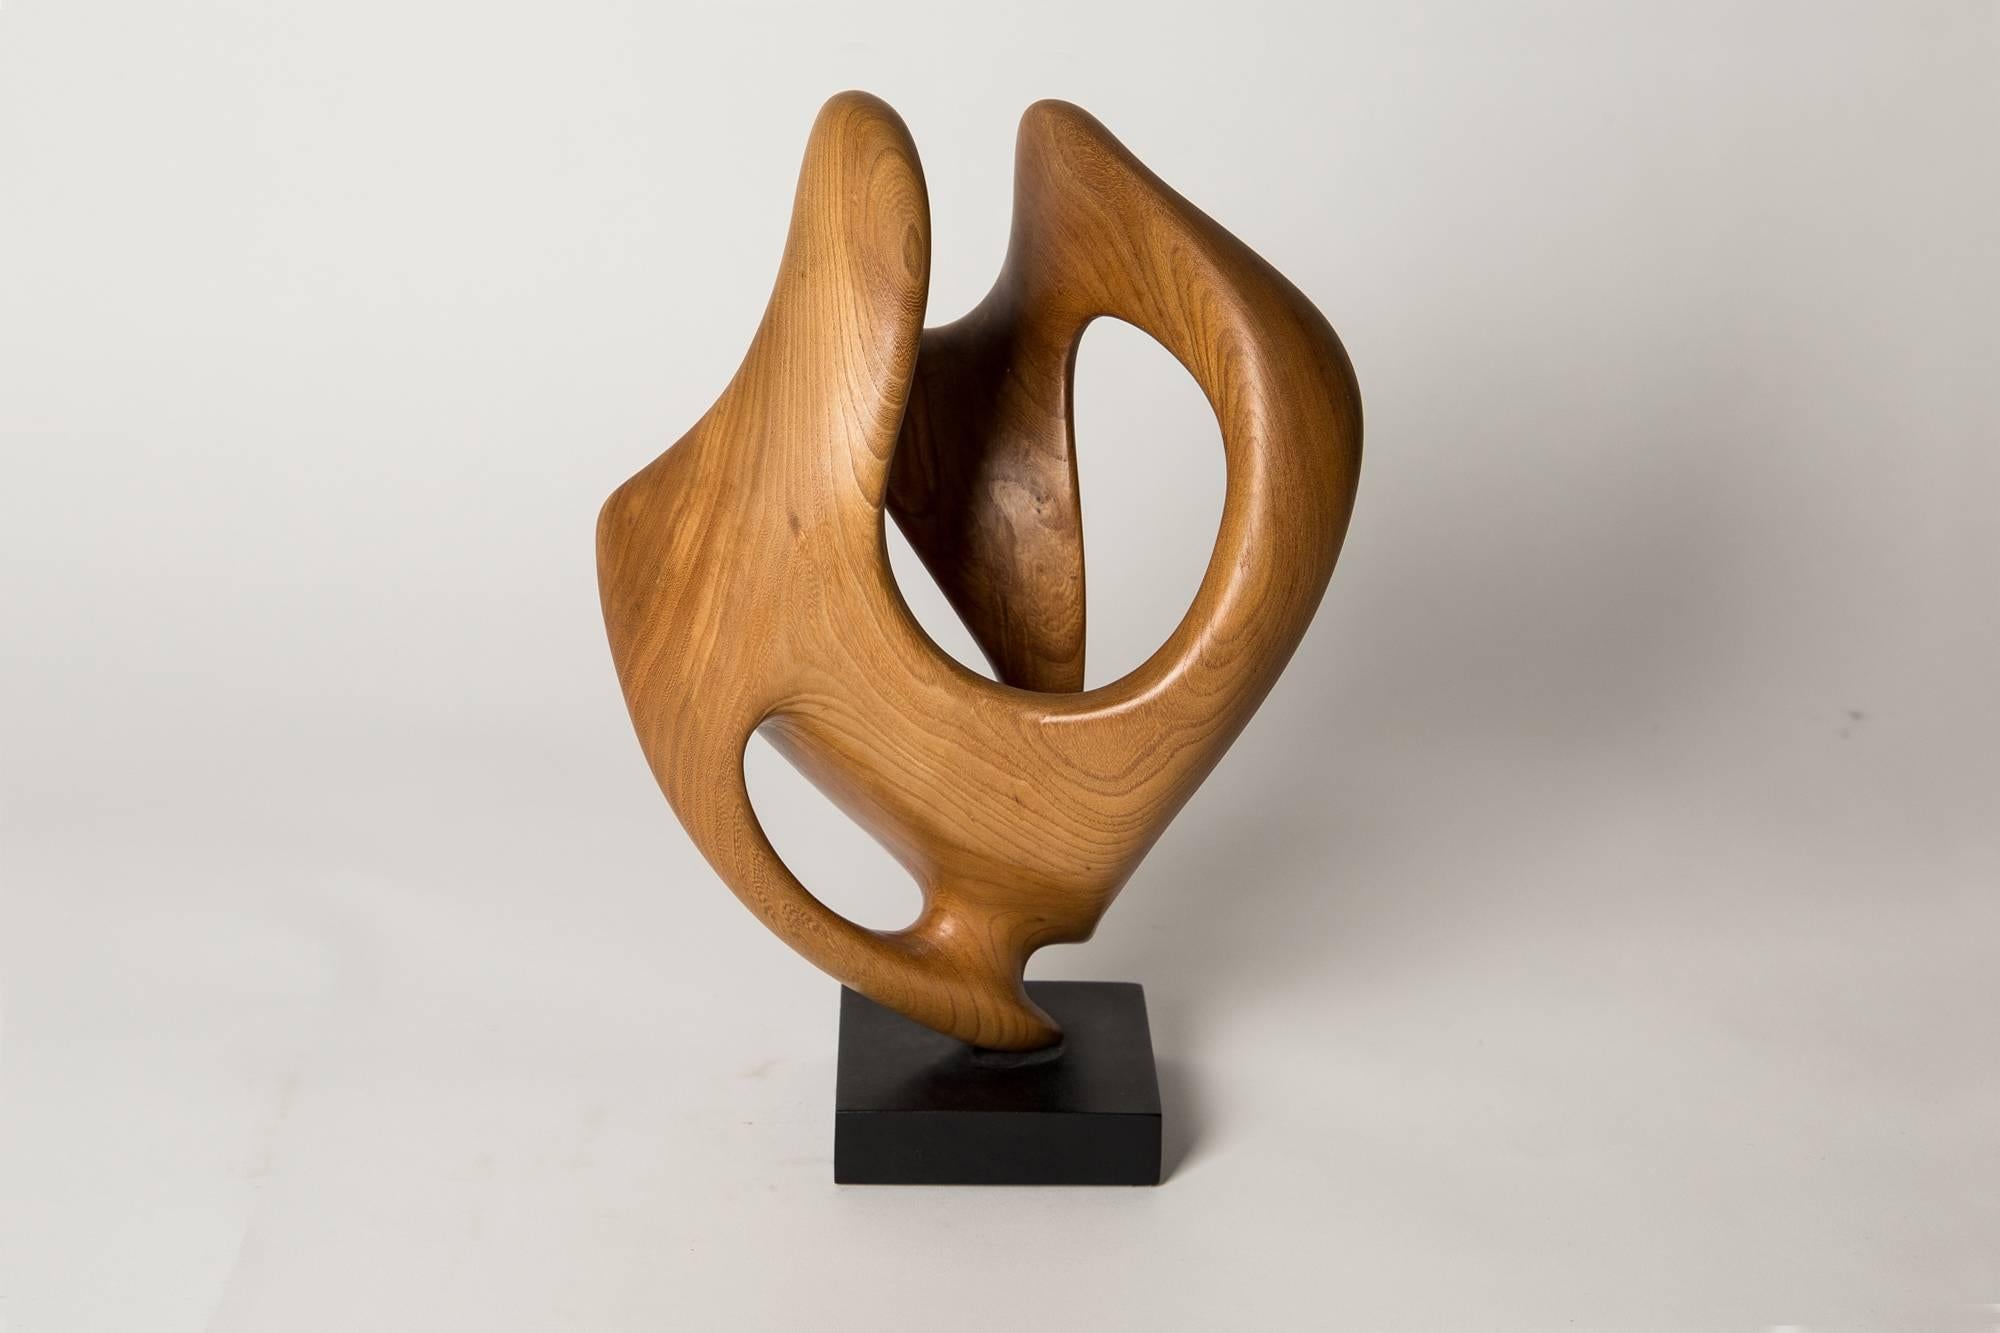 Hand-carved, sculpted from a single block of Elm.

The artist:
Born in Welwyn Garden City in 1944. Having exhibited mainly in Britain and a member of the exhilarating Hertfordshire Visual Art Form, sculpting for John is a natural activity in